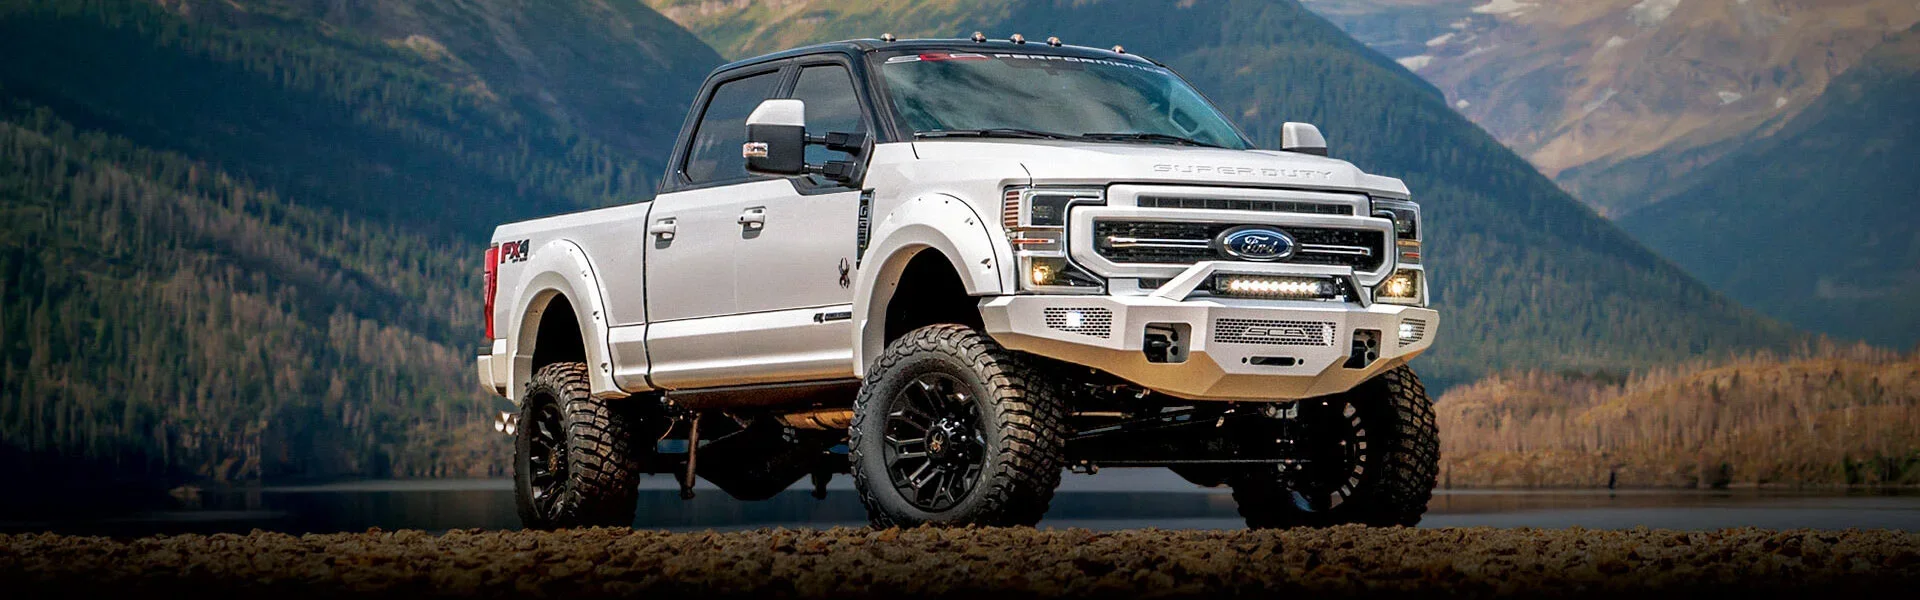 Ford Super Duty | Pilson Ford in Mattoon IL